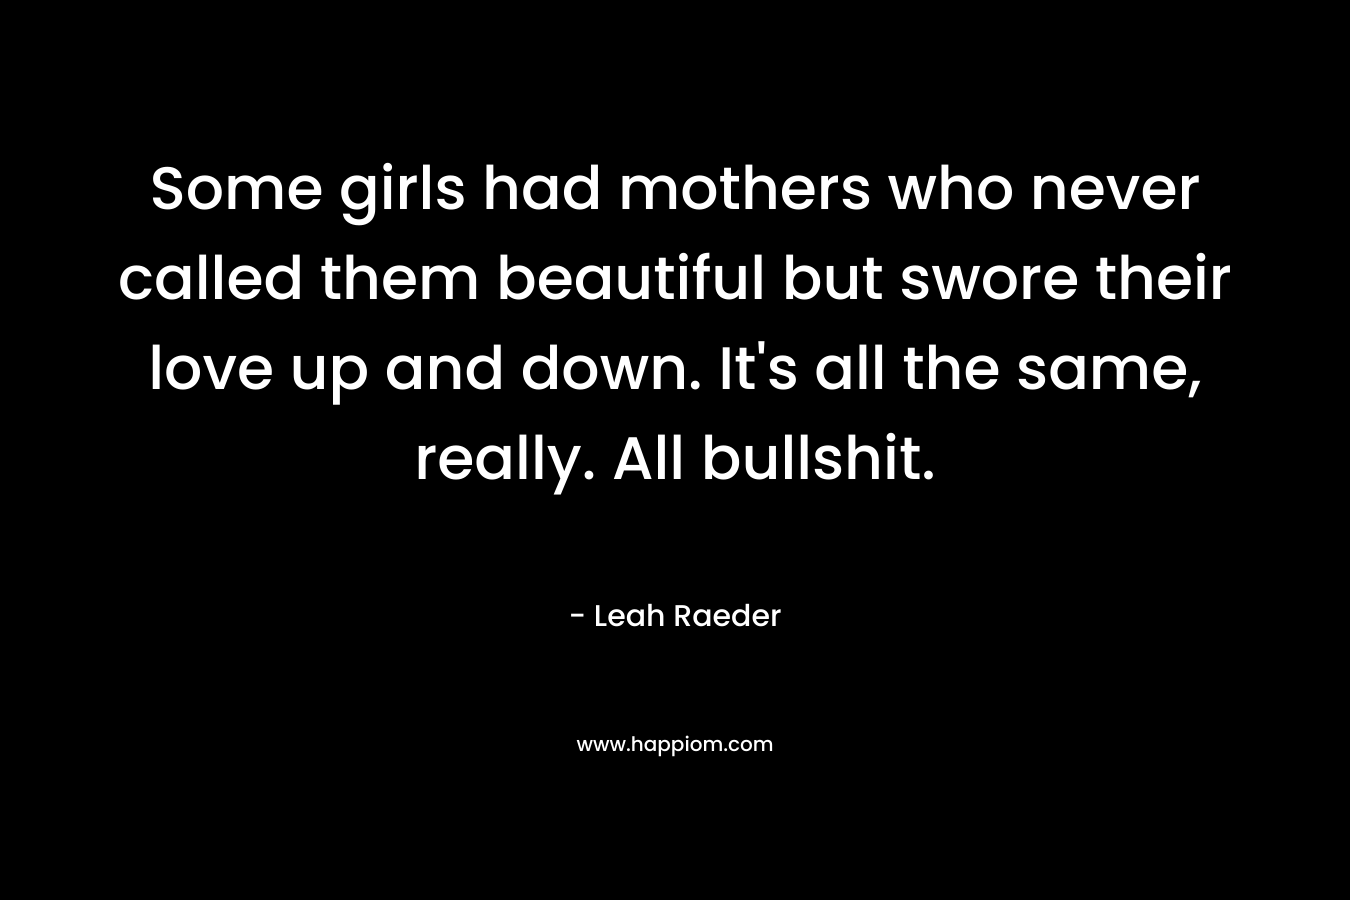 Some girls had mothers who never called them beautiful but swore their love up and down. It's all the same, really. All bullshit.